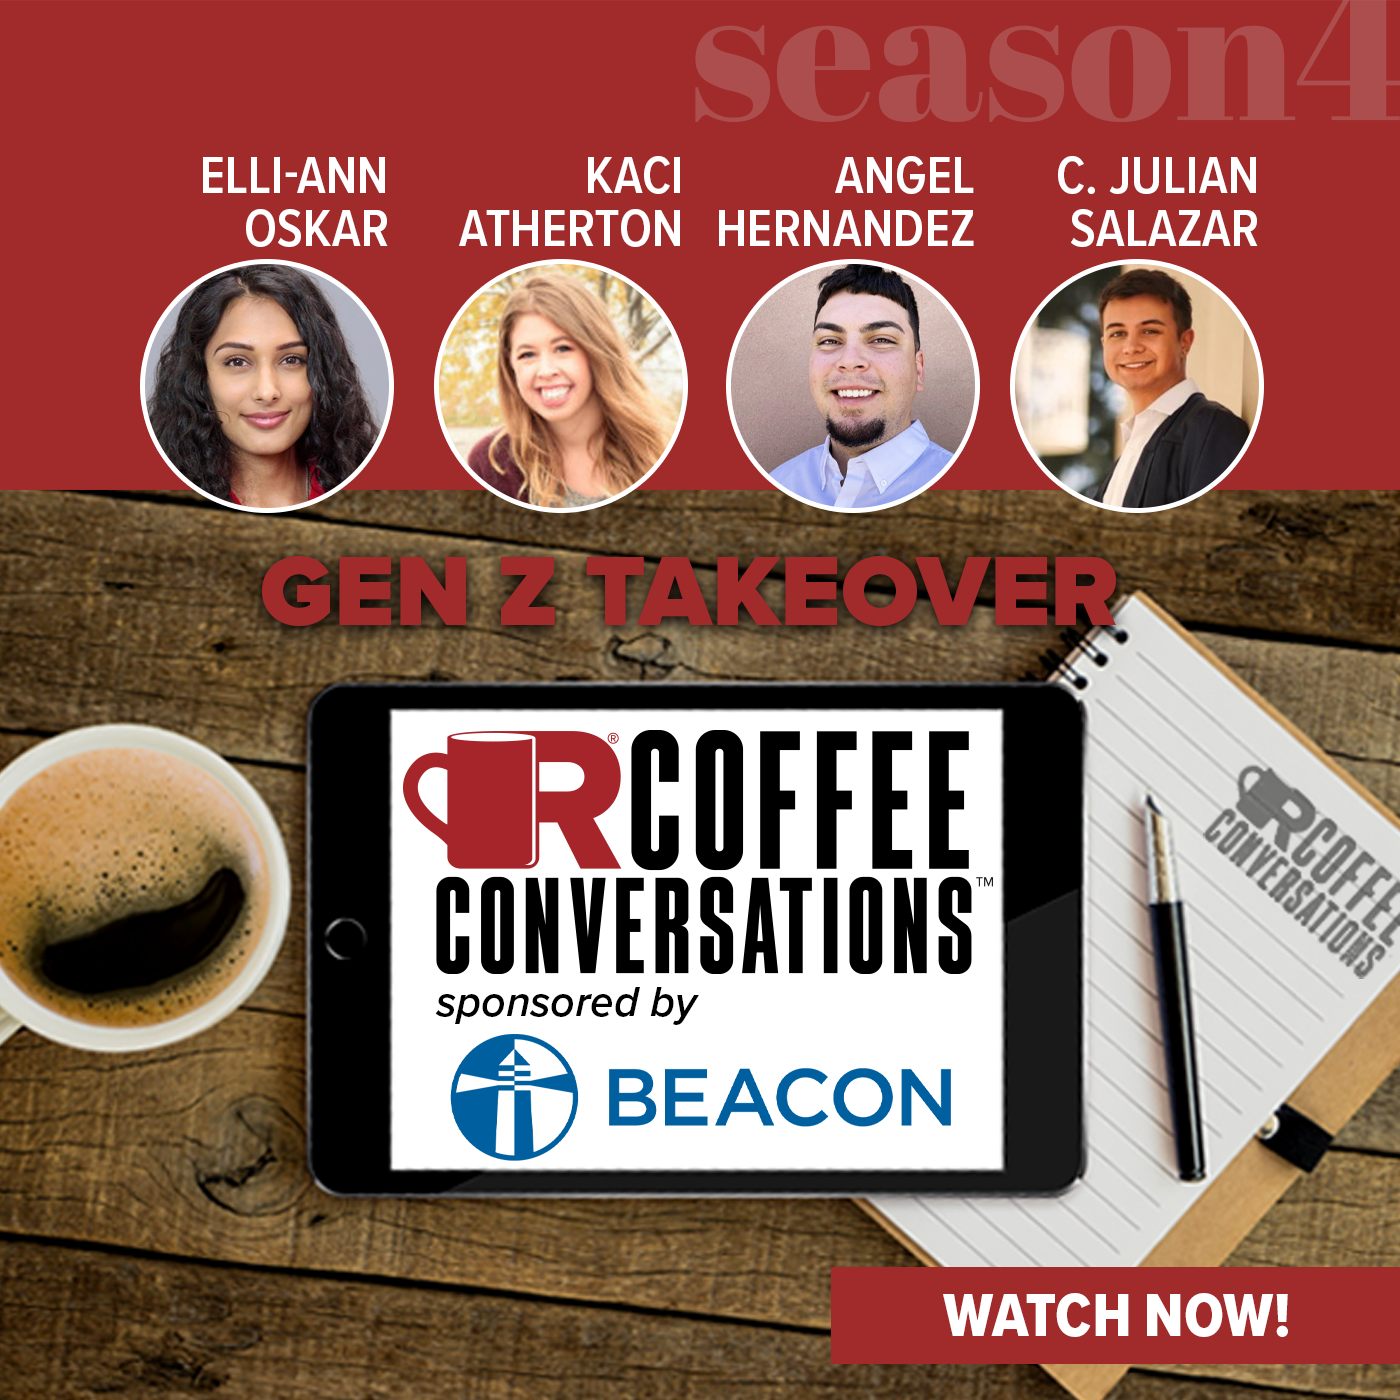 Beacon - Coffee Conversations - Generation Z Takeover! - POD